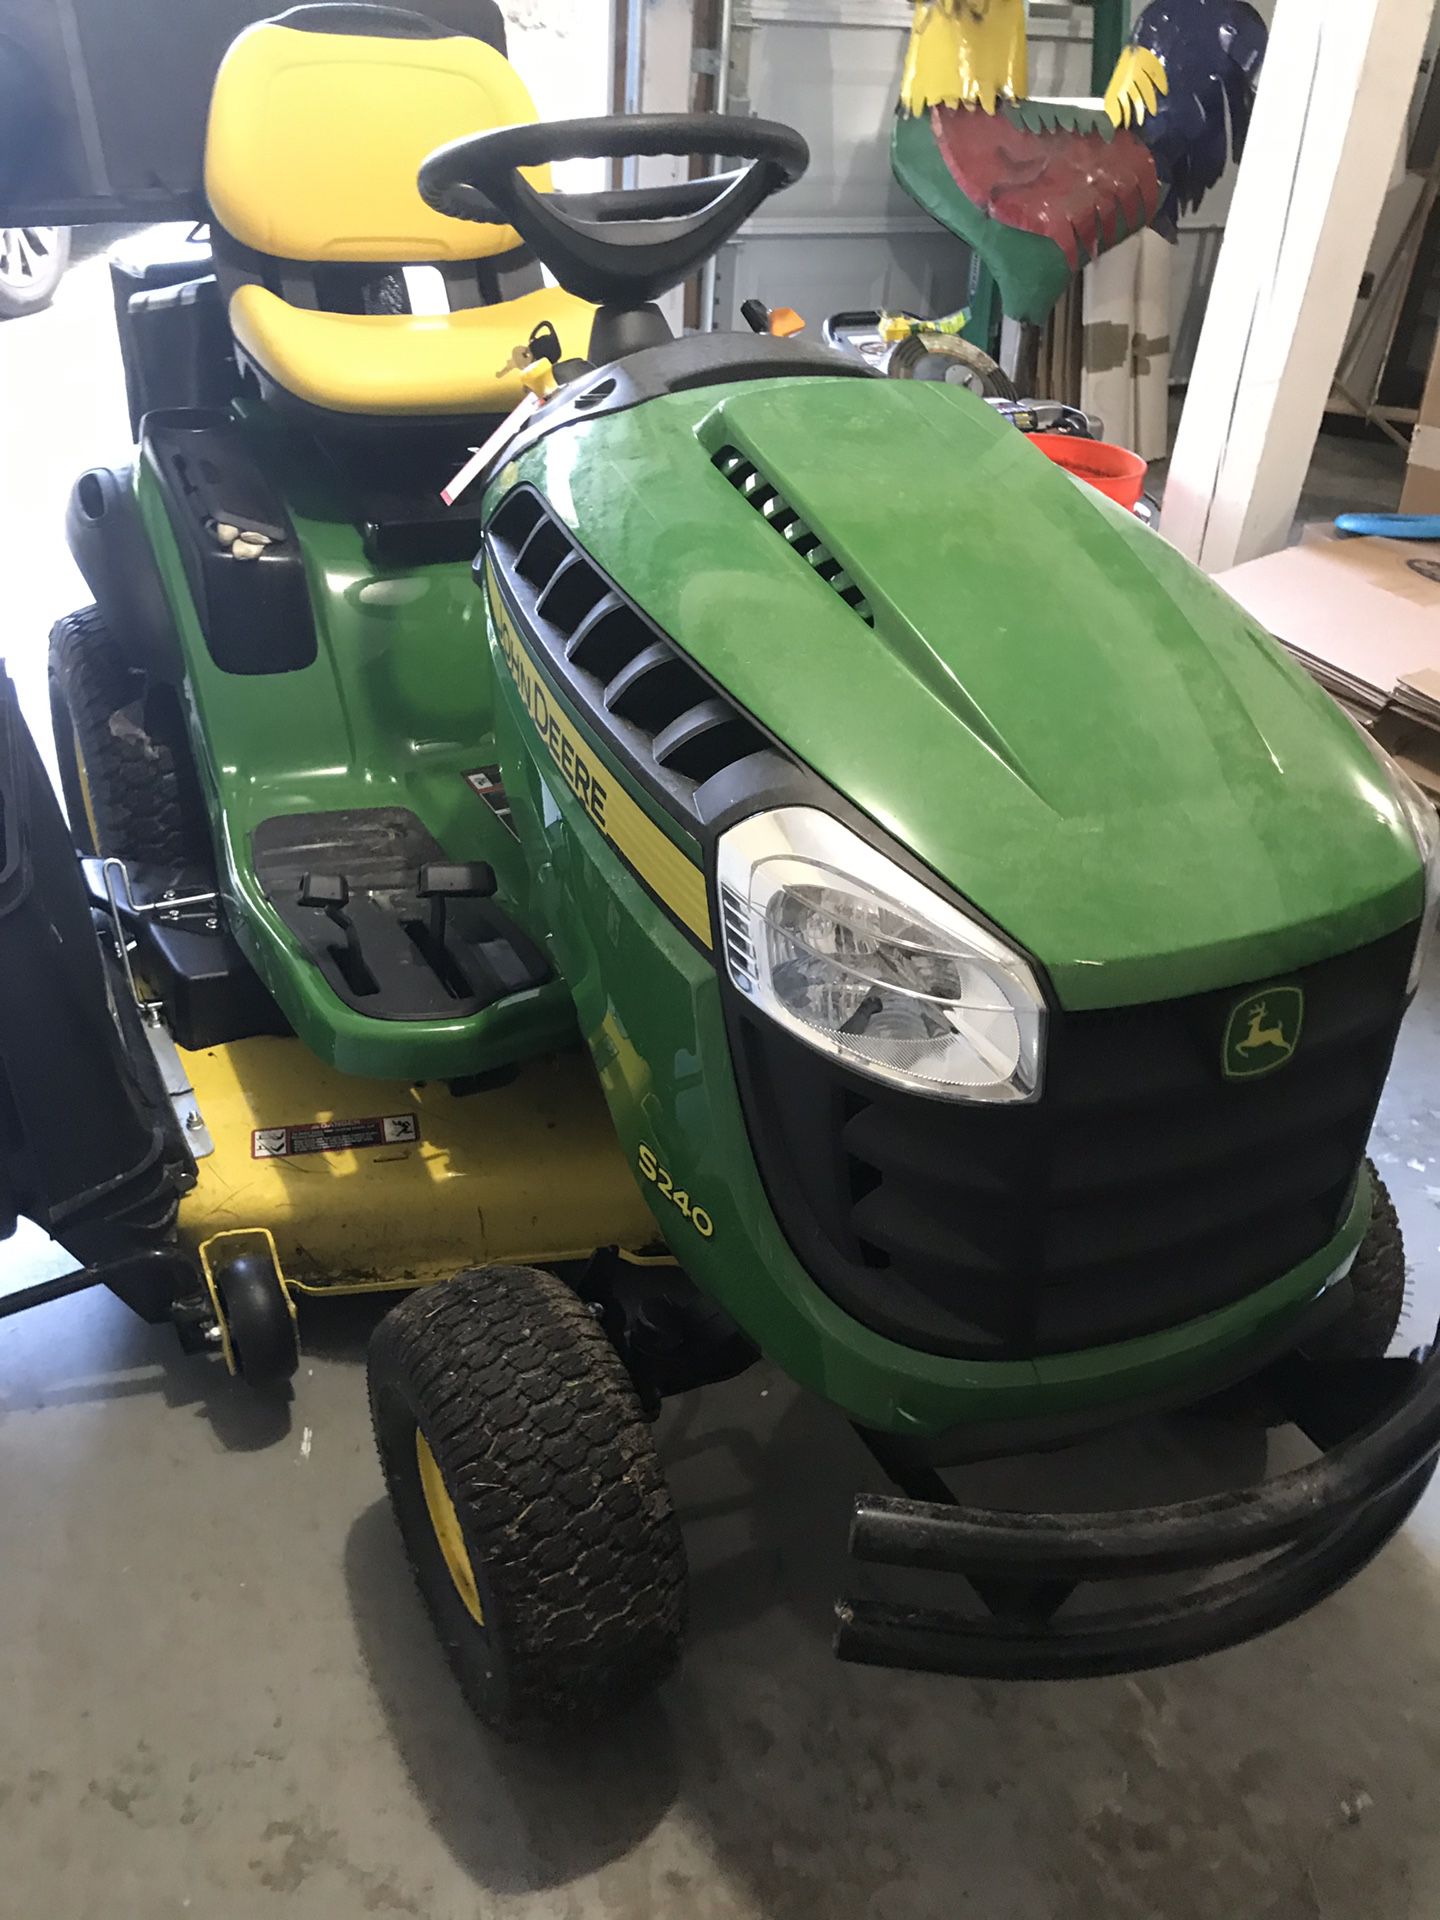 2018 John Deere S240 riding lawn mower tractor with power flow bagger attachment